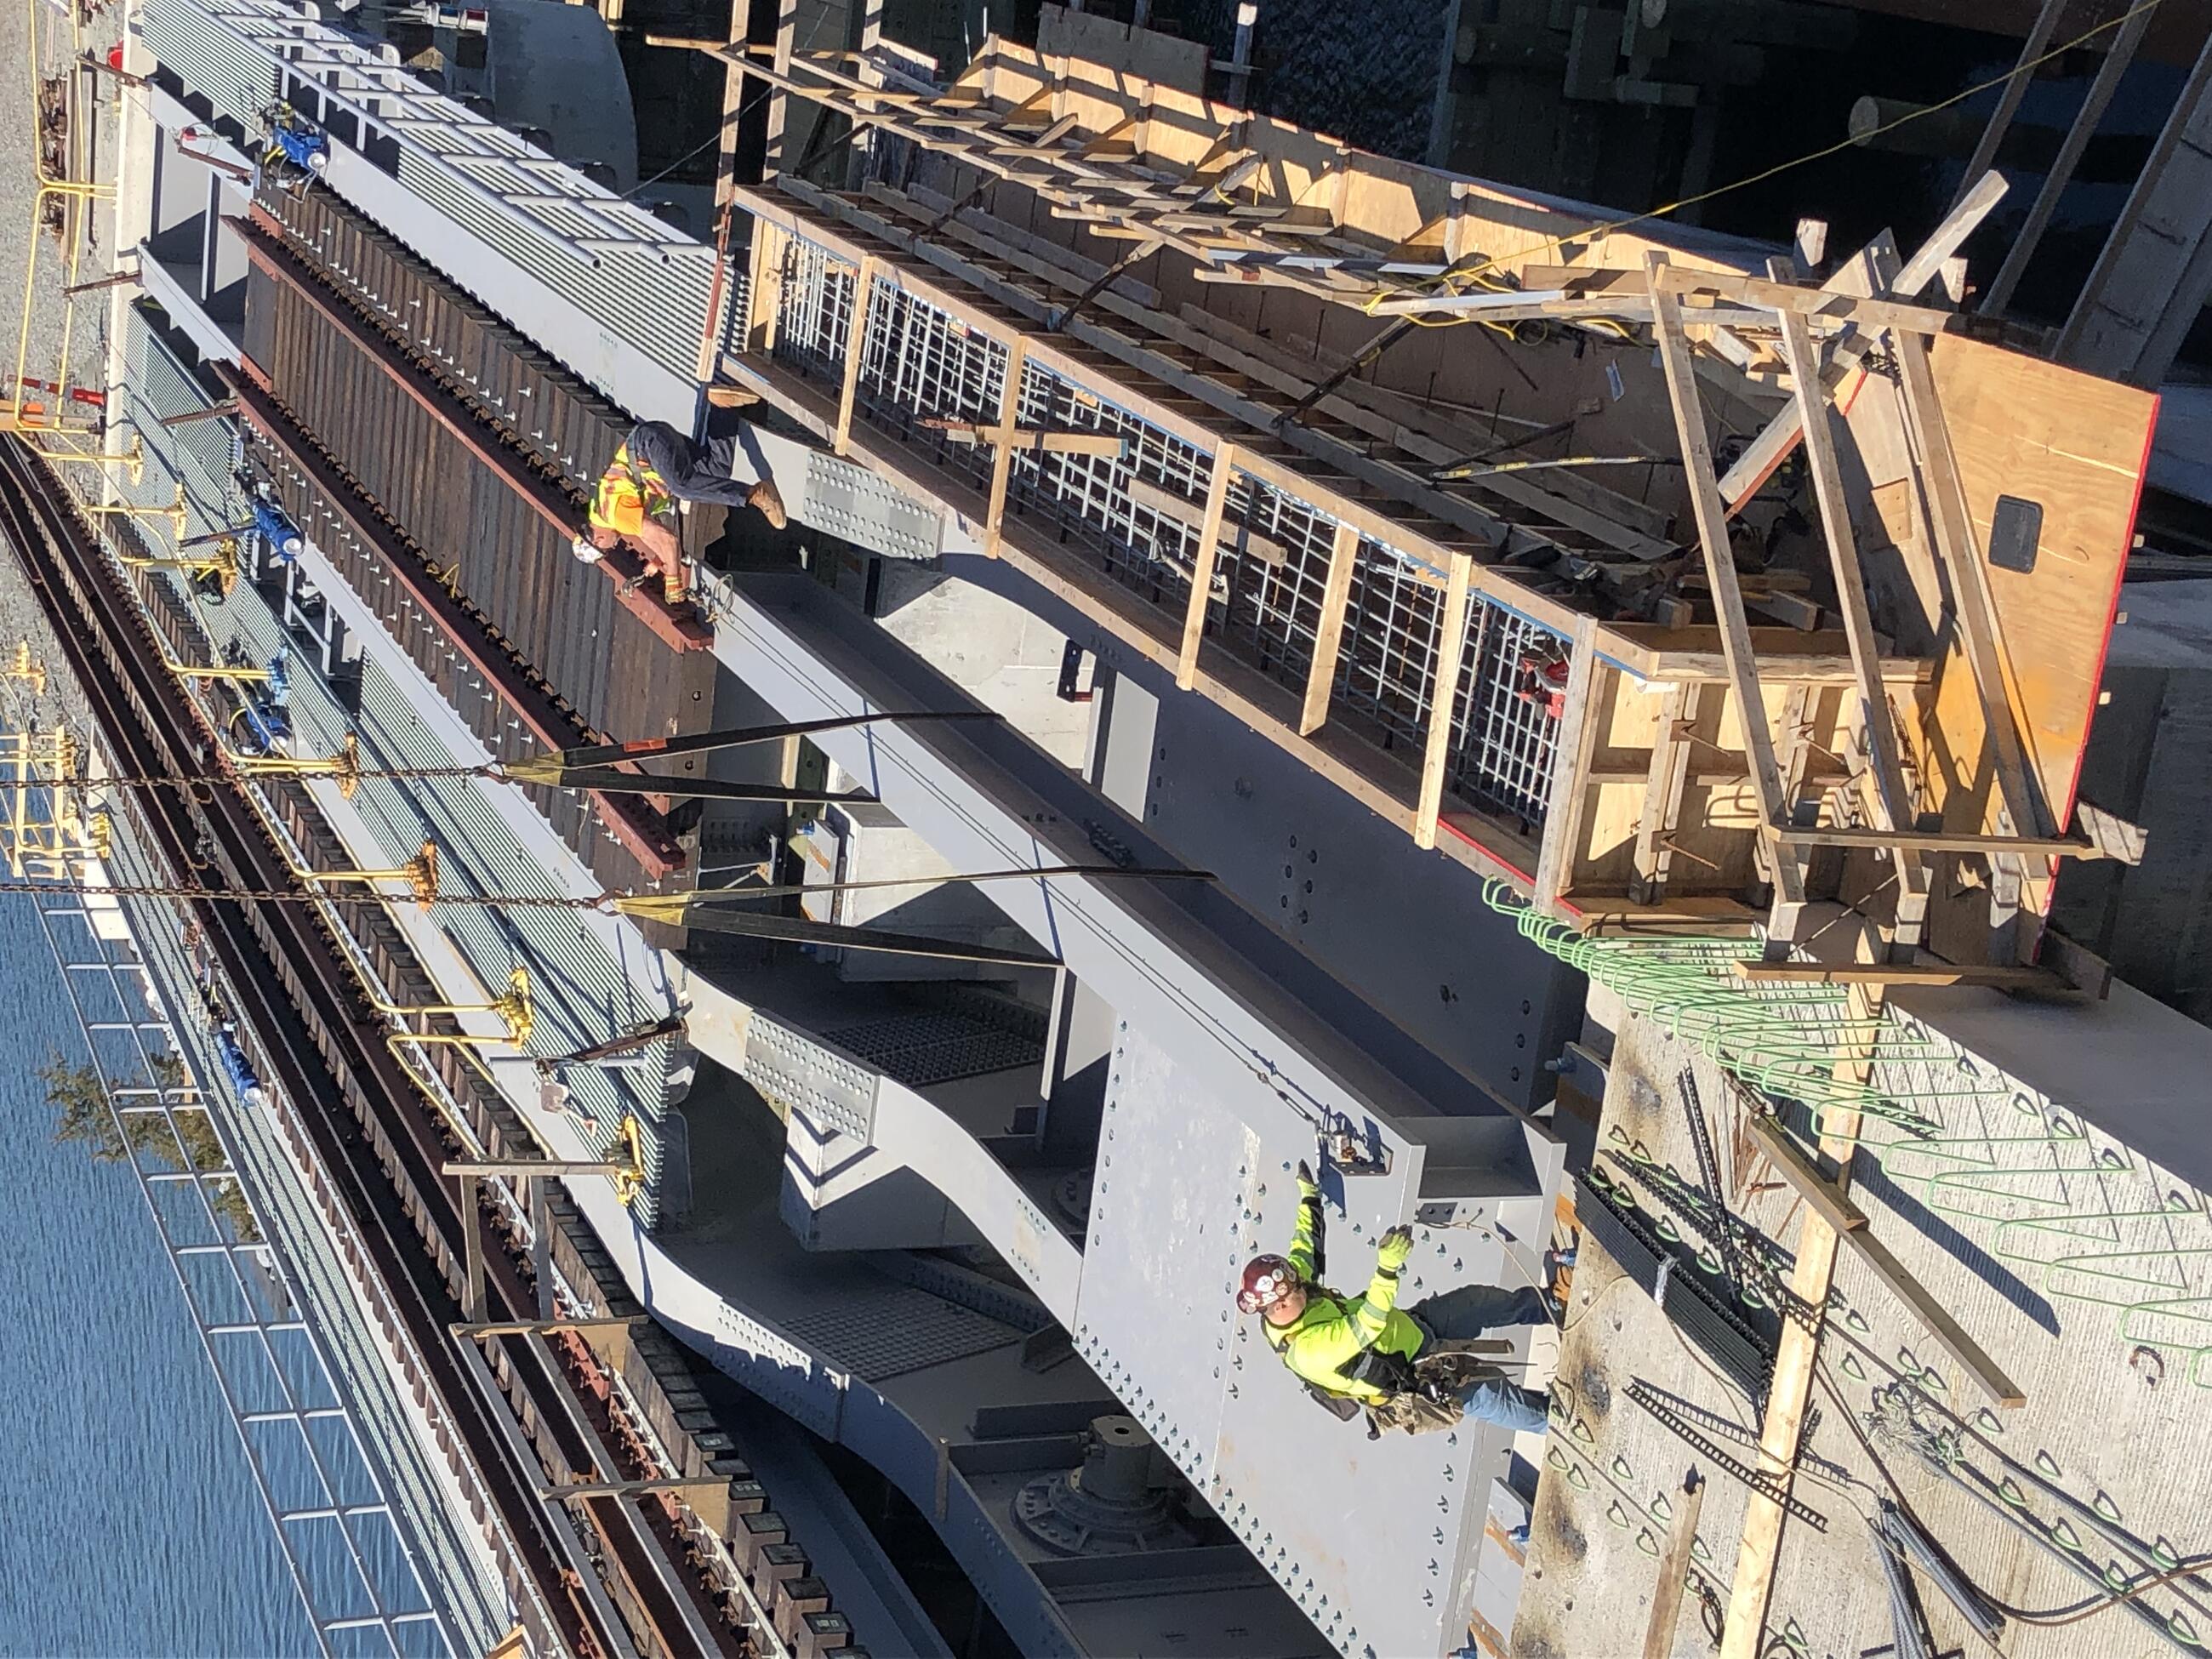 A long, elongated, box-shaped steel beam is suspended over the bascule counter weight on the bridge. Yellow-jacketed workers in hardhats hold each end of the beam and move it into place. The train tracks can be seen at upper right, the waterway at upper left. 